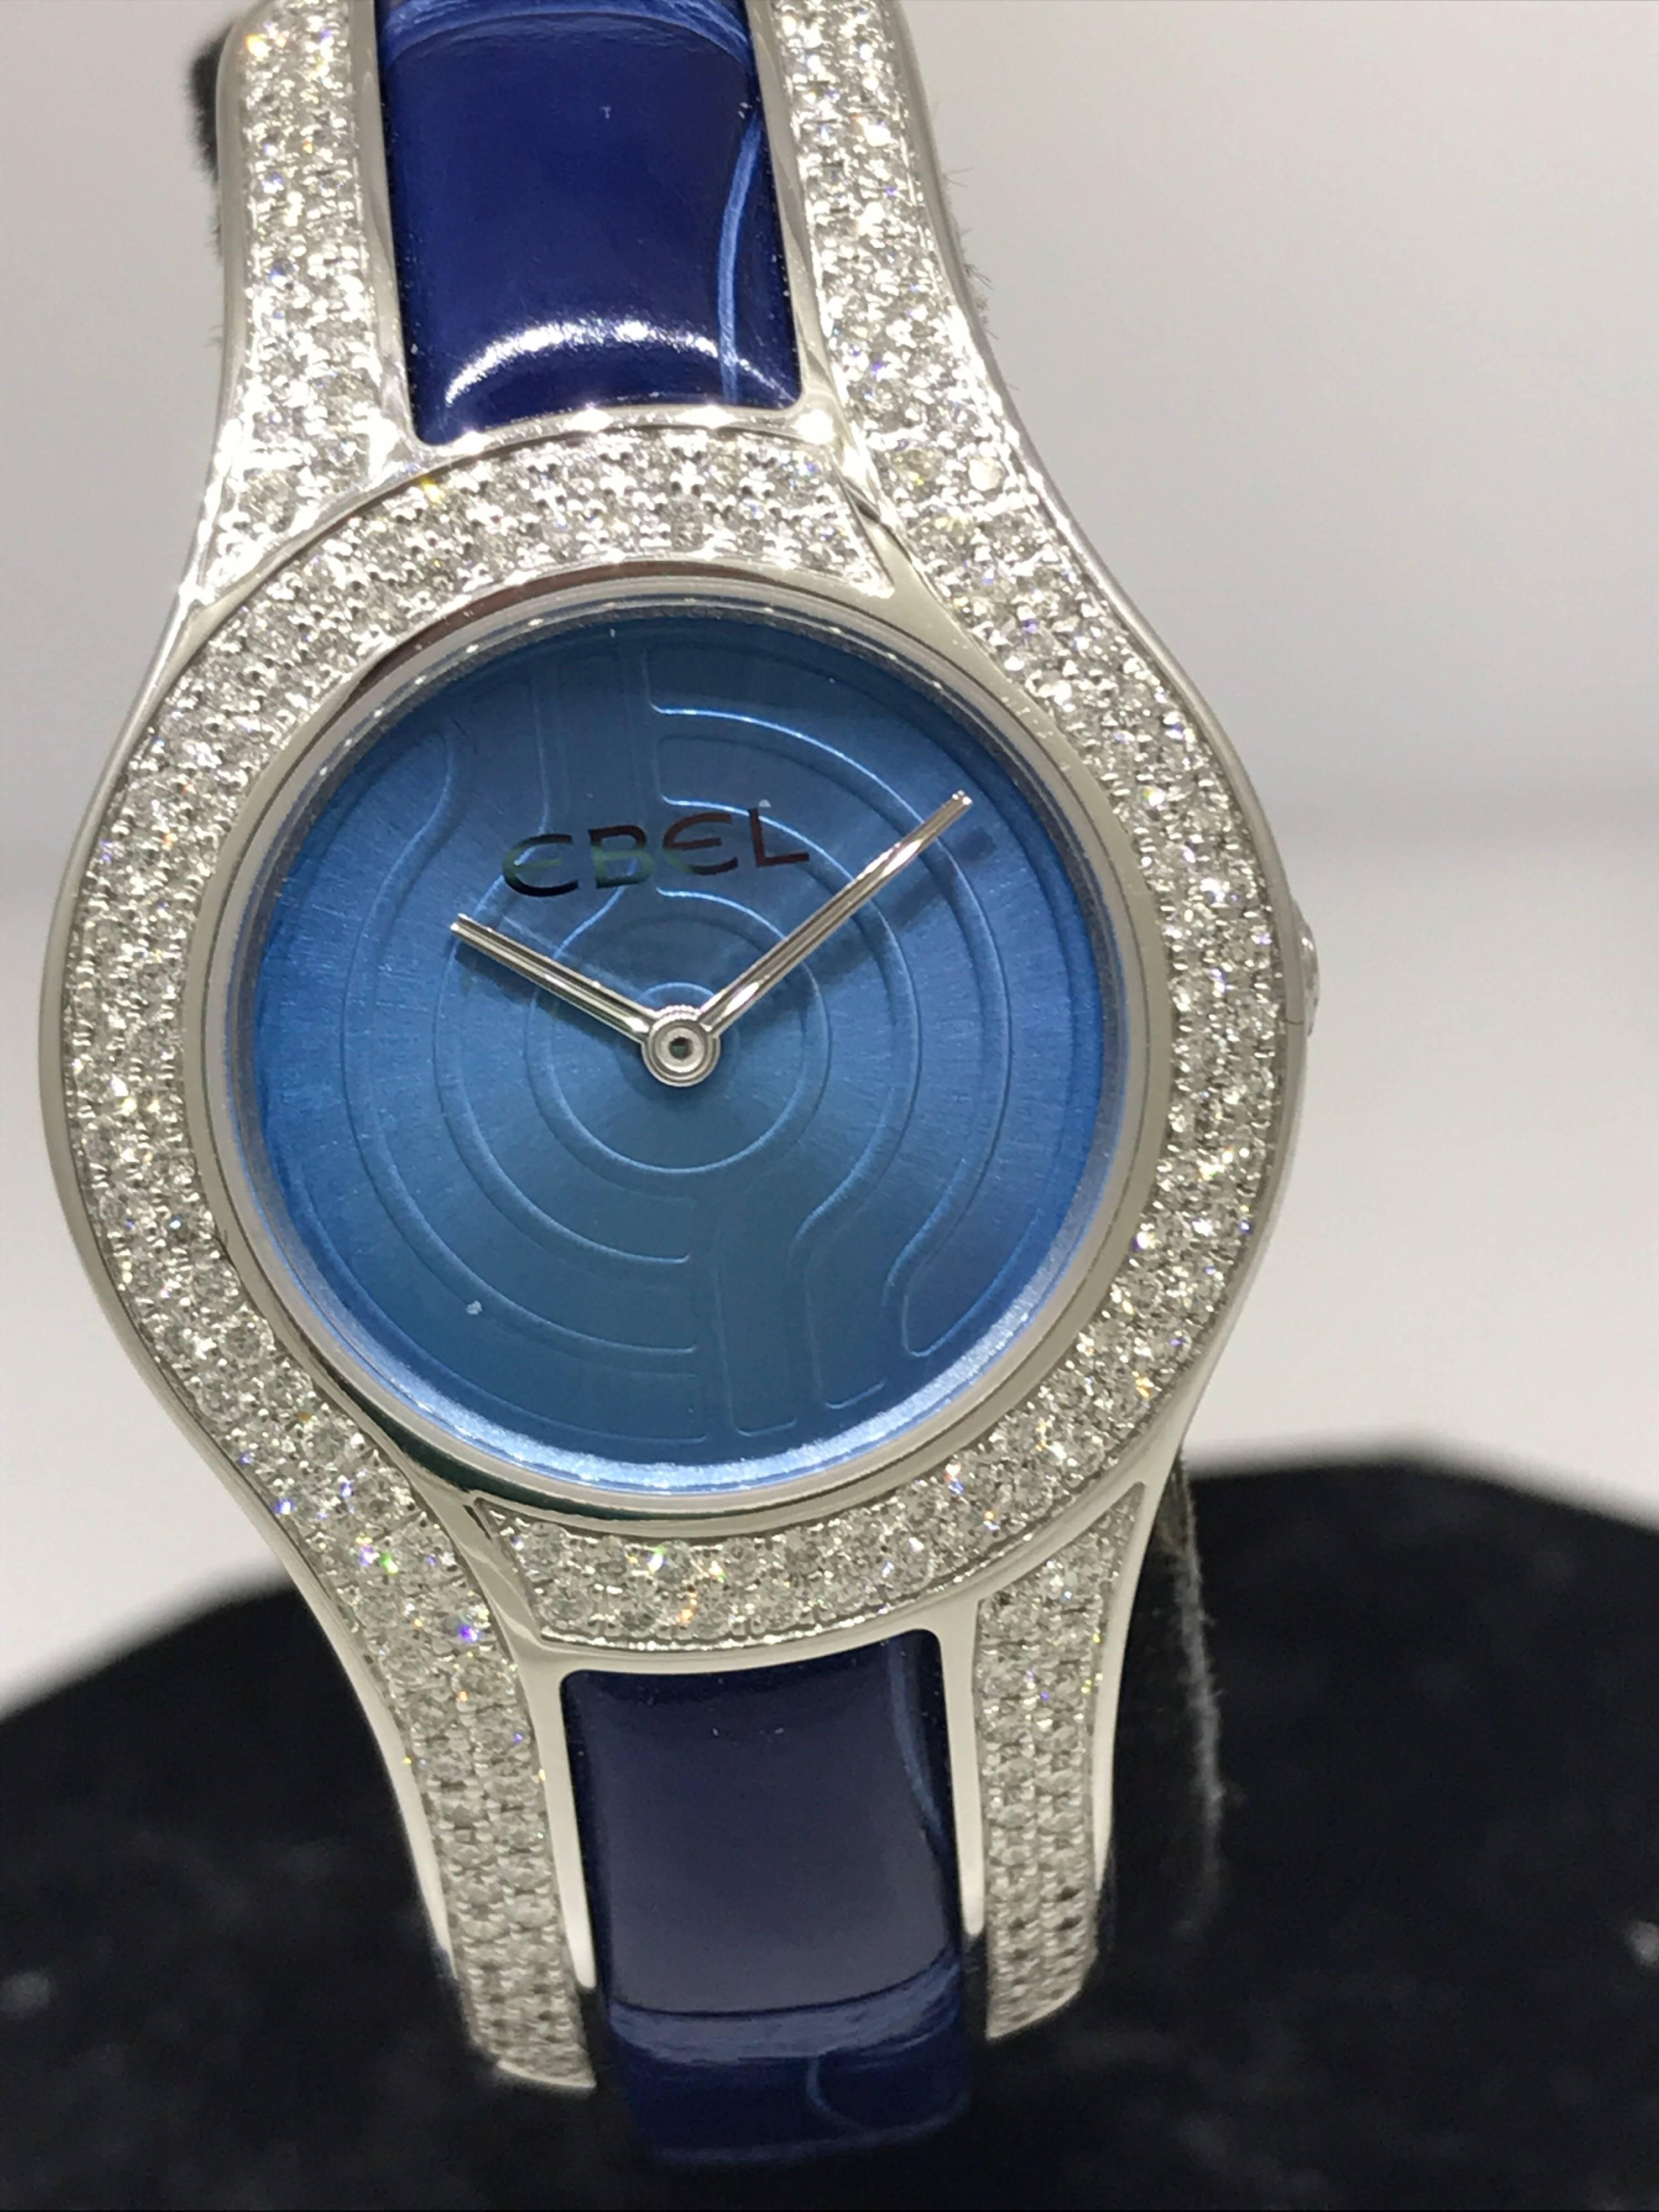 Ebel Midnight Moonchic White Gold Diamond Leather Band Ladies Watch 3157H29 New For Sale 1